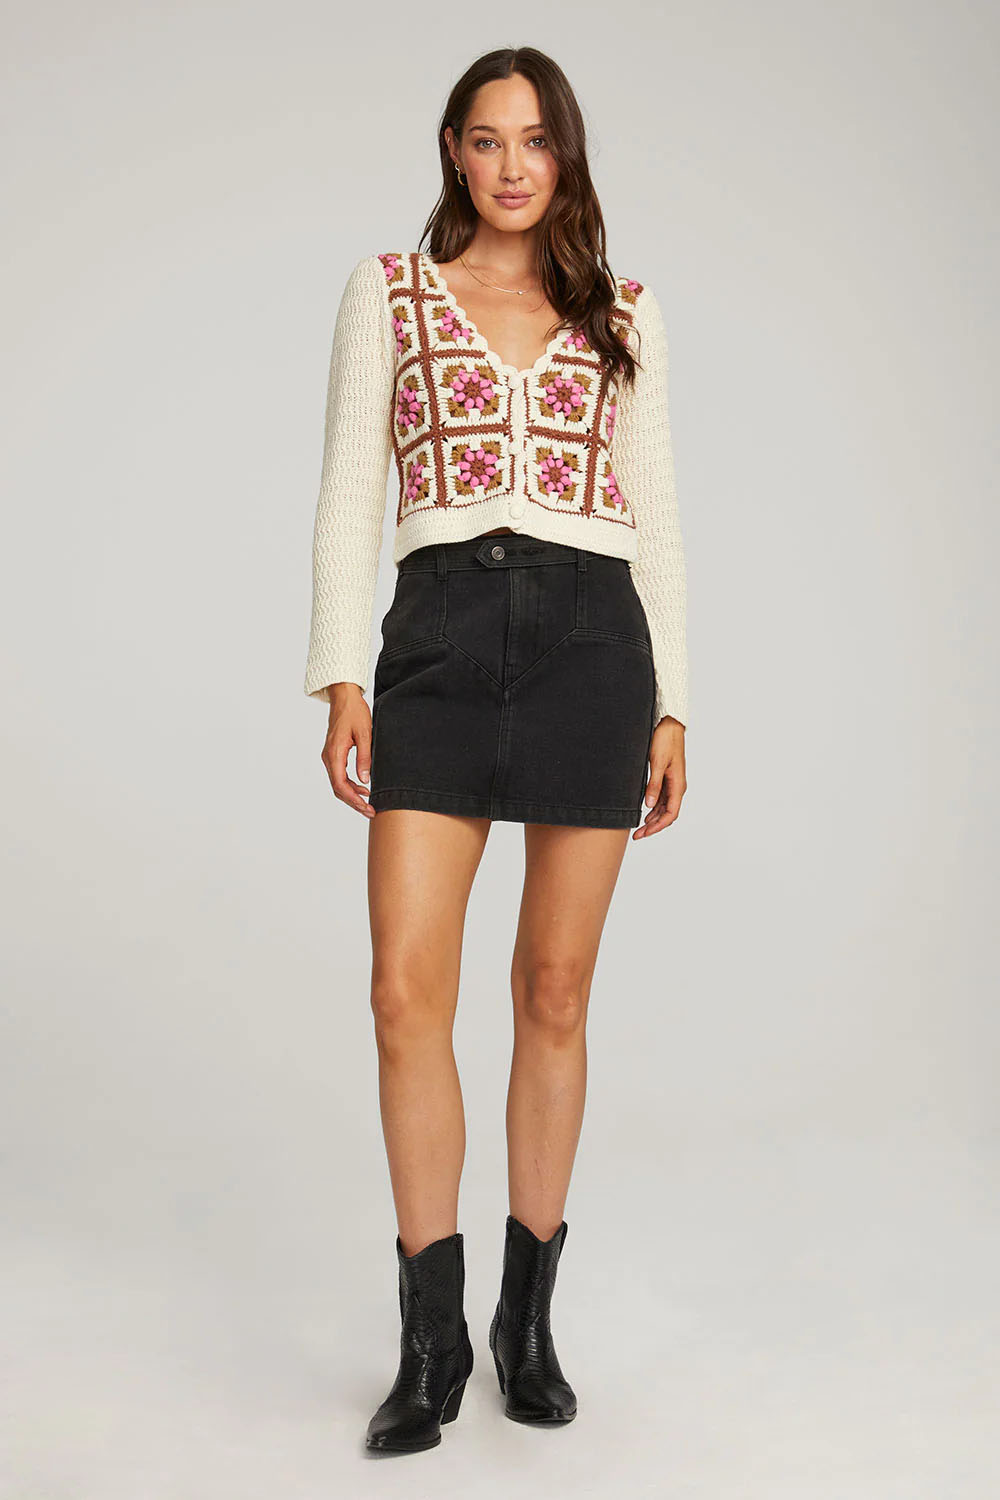 Saltwater Luxe - Chels Sweater - Natural